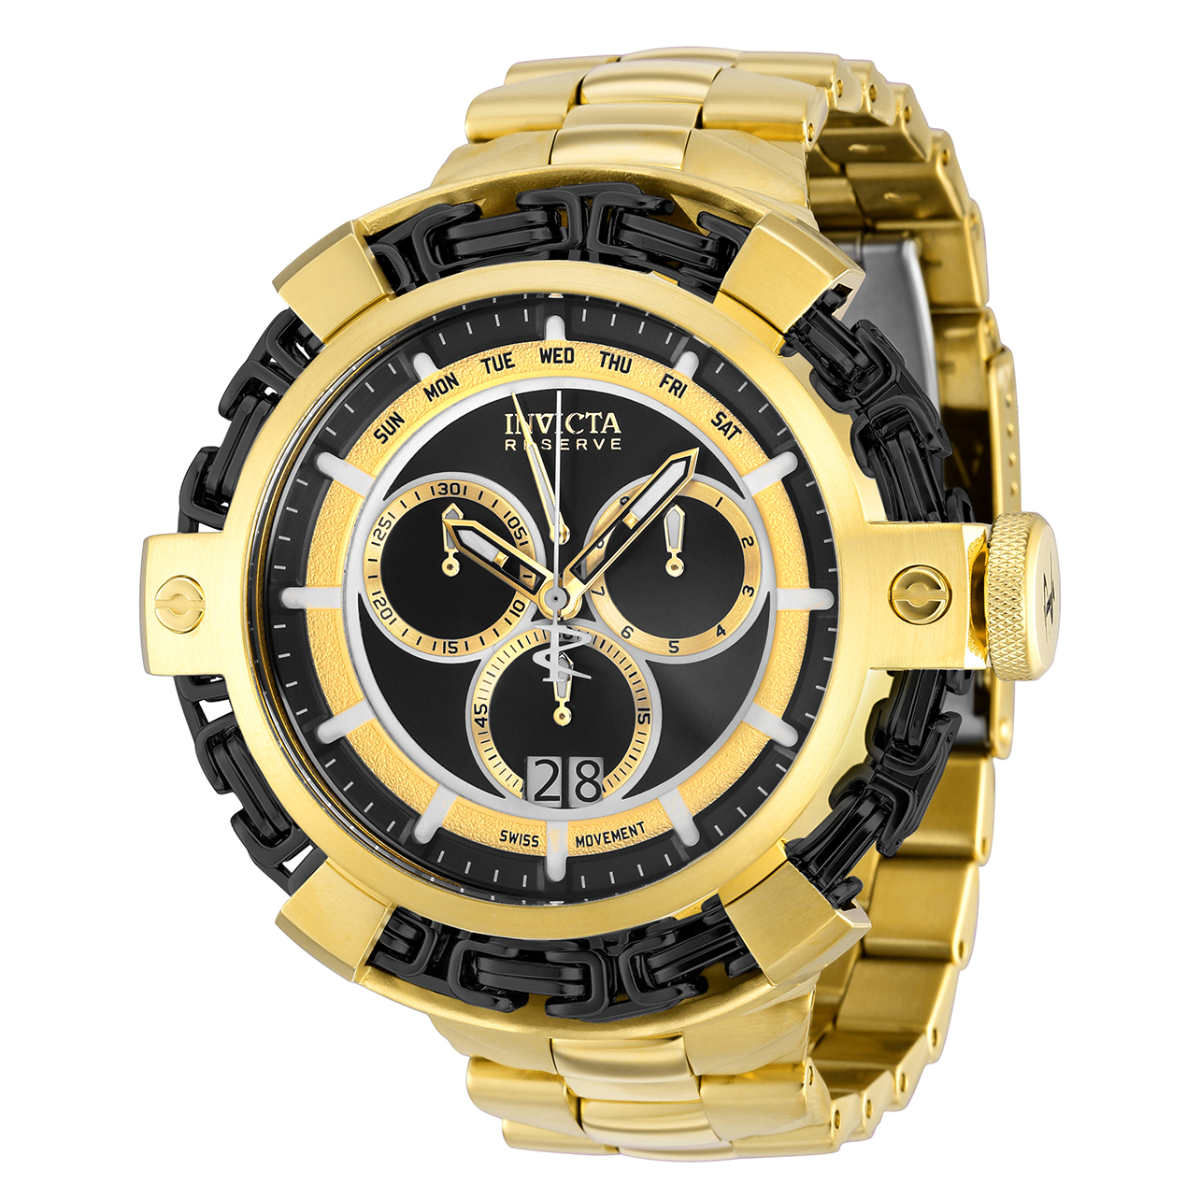 Invicta Reserve Wolf King Men%27s Watch - 61.5mm, Gold (36186)